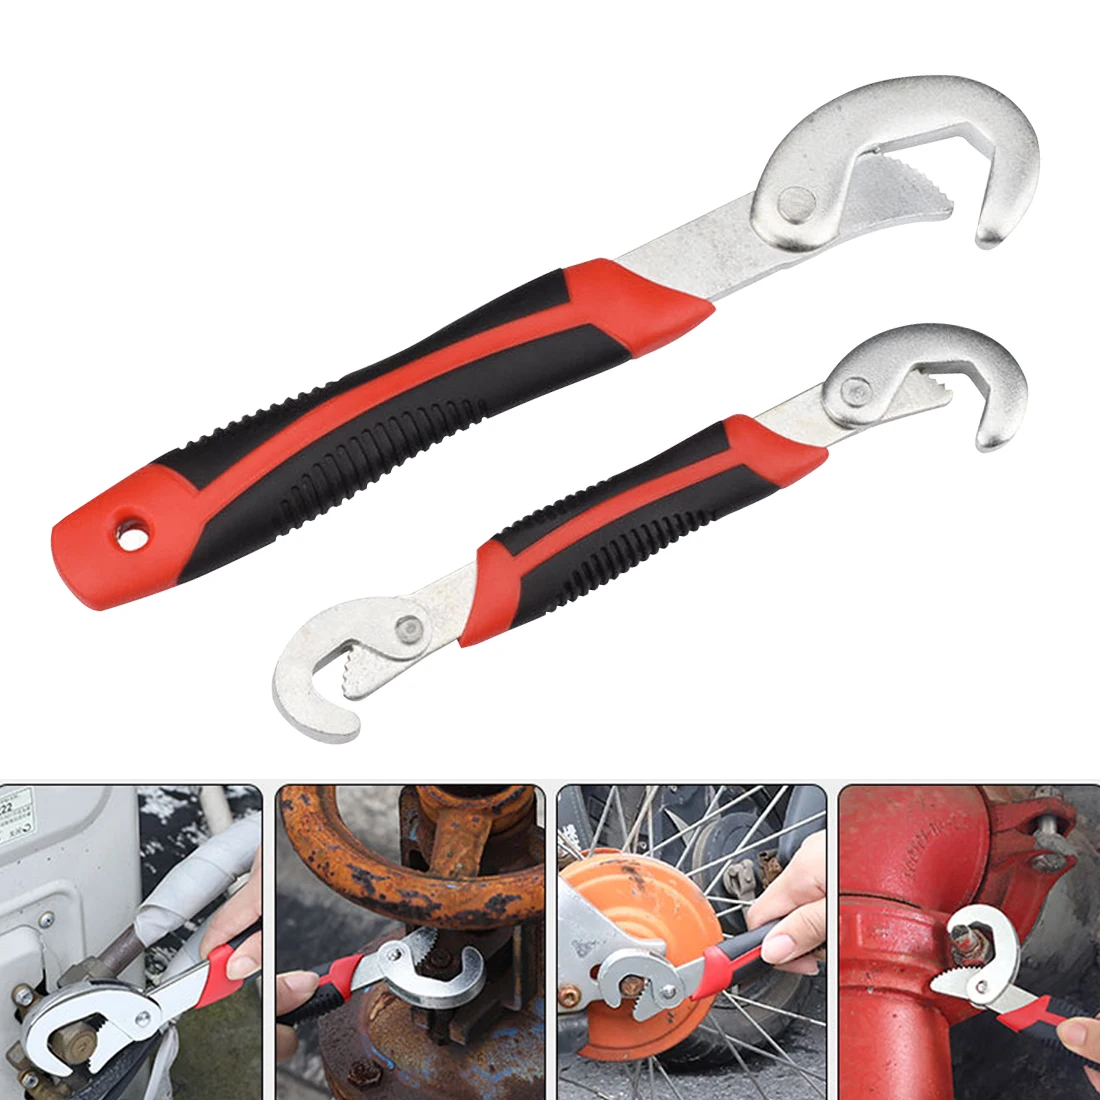 

Multi-Functional Wrench Spanner Set Adjustable Universal Quick Snap Soft Grip Portable Torque Ratchet Oil Filter Hand Tools